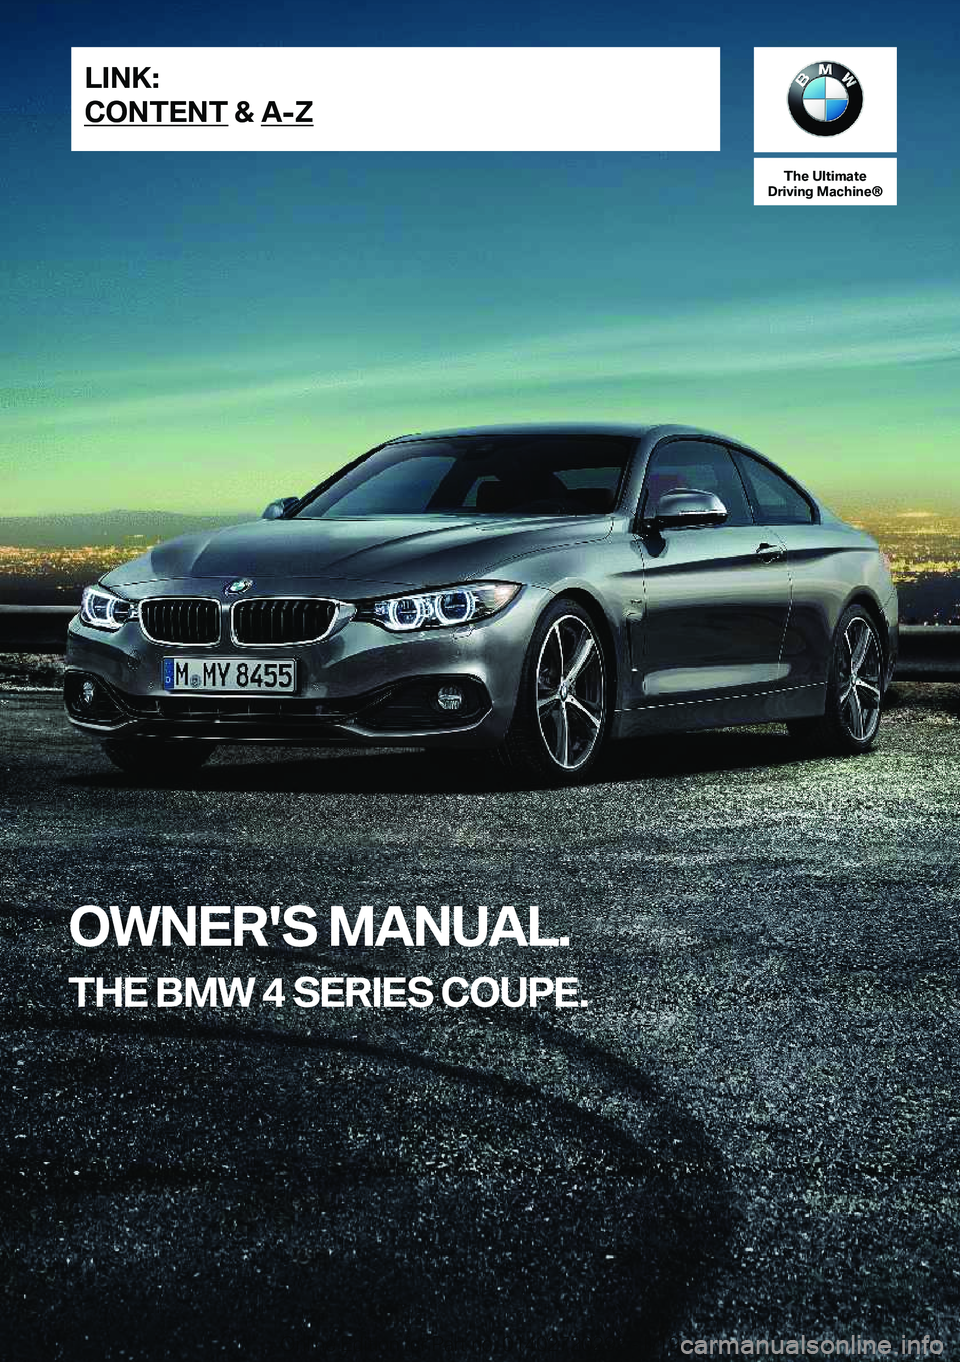 BMW 4 SERIES COUPE 2020  Owners Manual �T�h�e��U�l�t�i�m�a�t�e
�D�r�i�v�i�n�g��M�a�c�h�i�n�e�n
�O�W�N�E�R�'�S��M�A�N�U�A�L�.
�T�H�E��B�M�W��4��S�E�R�I�E�S��C�O�U�P�E�.�L�I�N�K�:
�C�O�N�T�E�N�T��&��A�-�Z�O�n�l�i�n�e��E�d�i�t�i